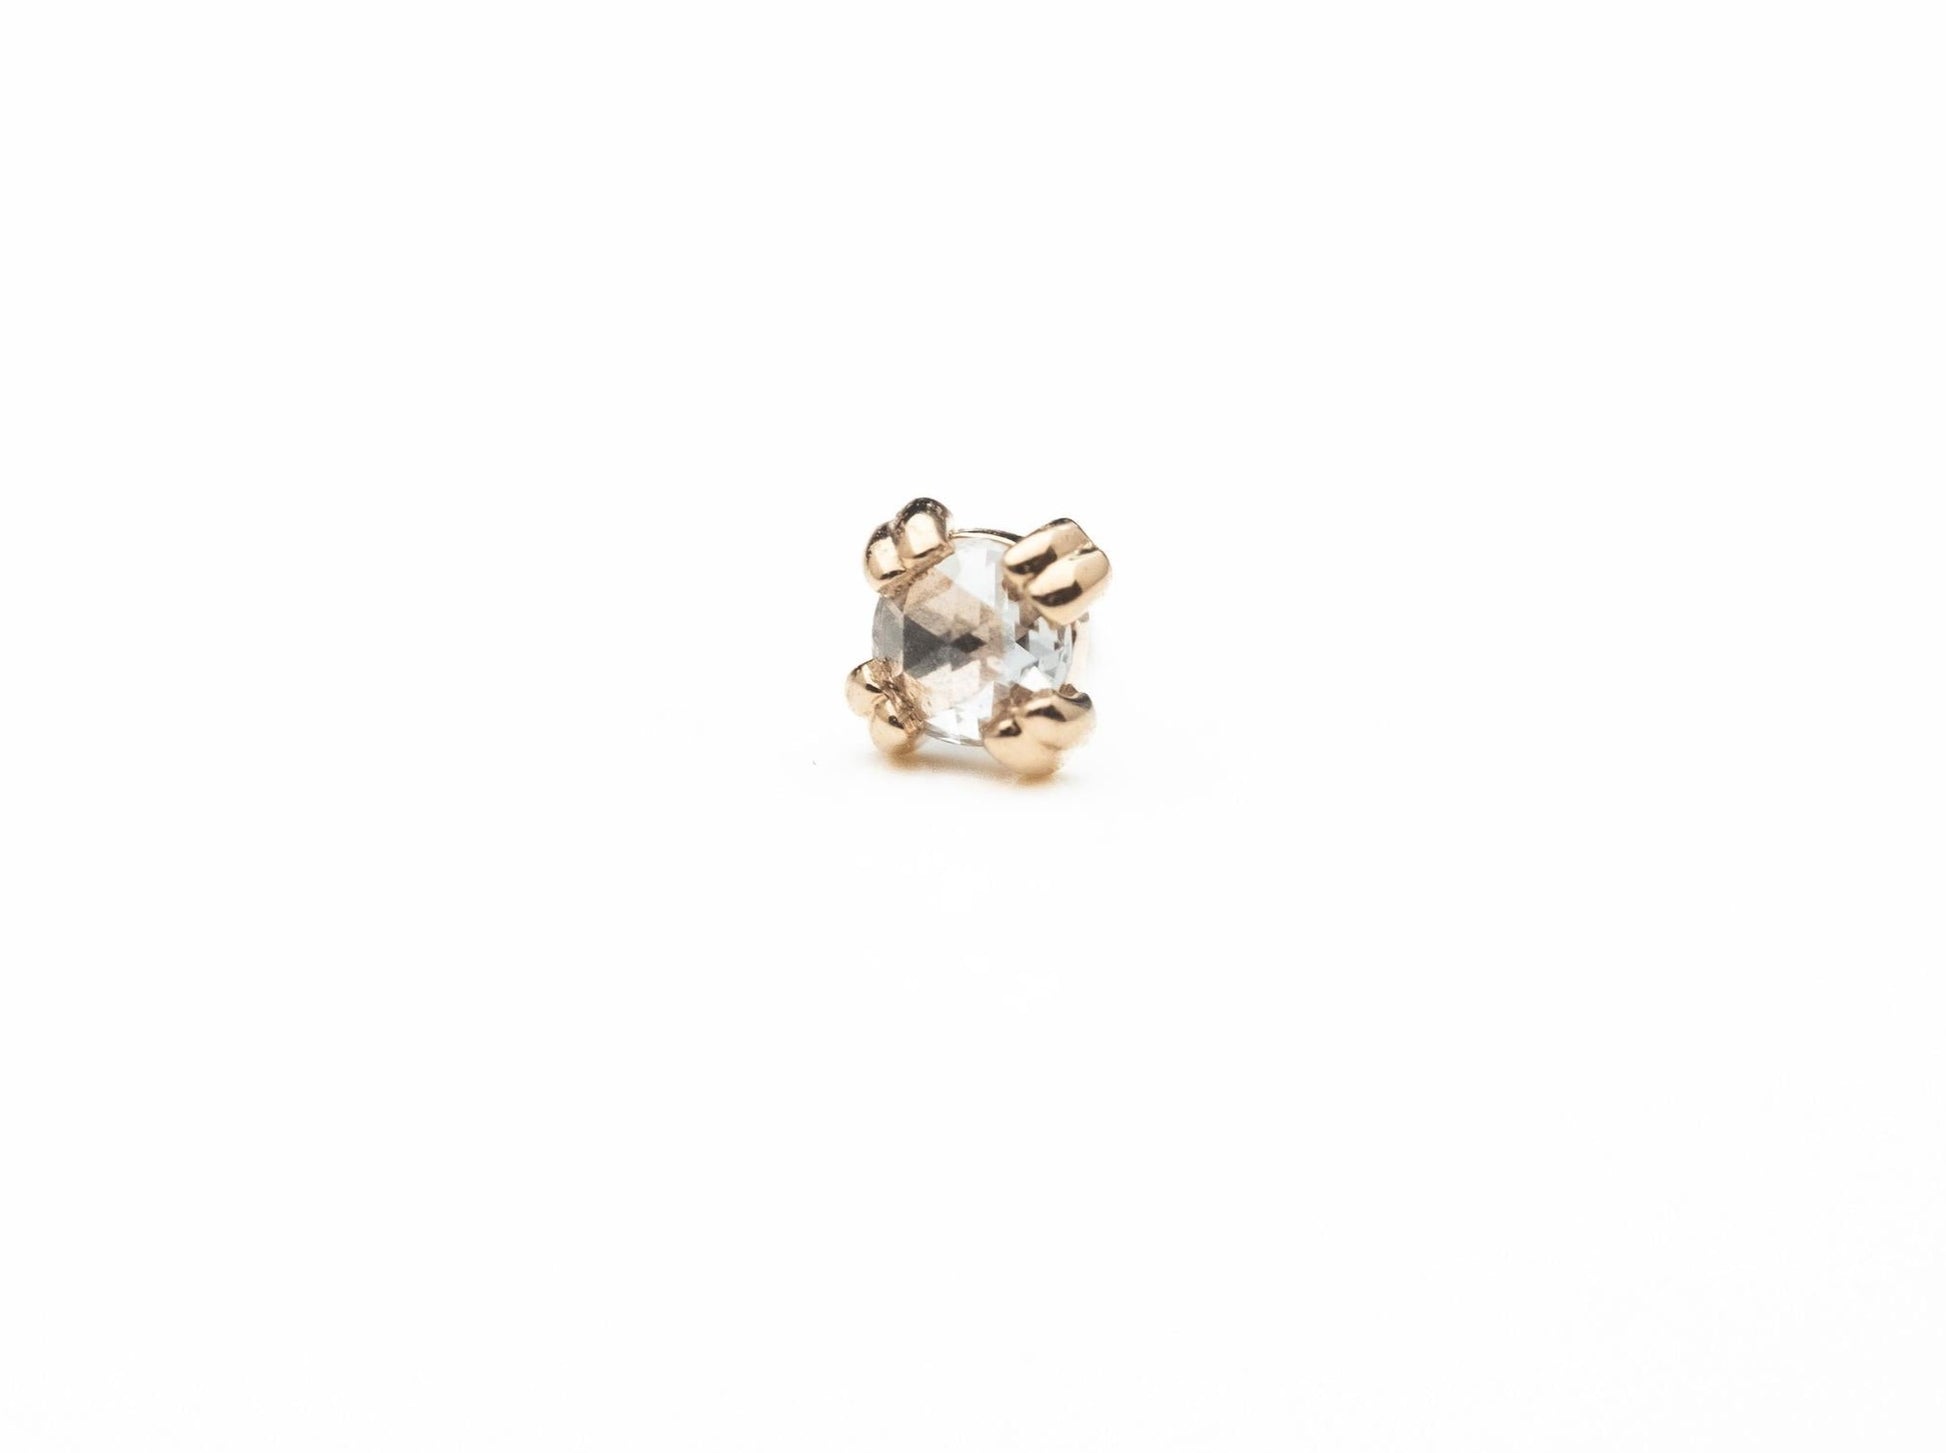 Cab Prong 2mm Rose Cut VS Diamond in 14k Rose Gold Threadless by BVLA